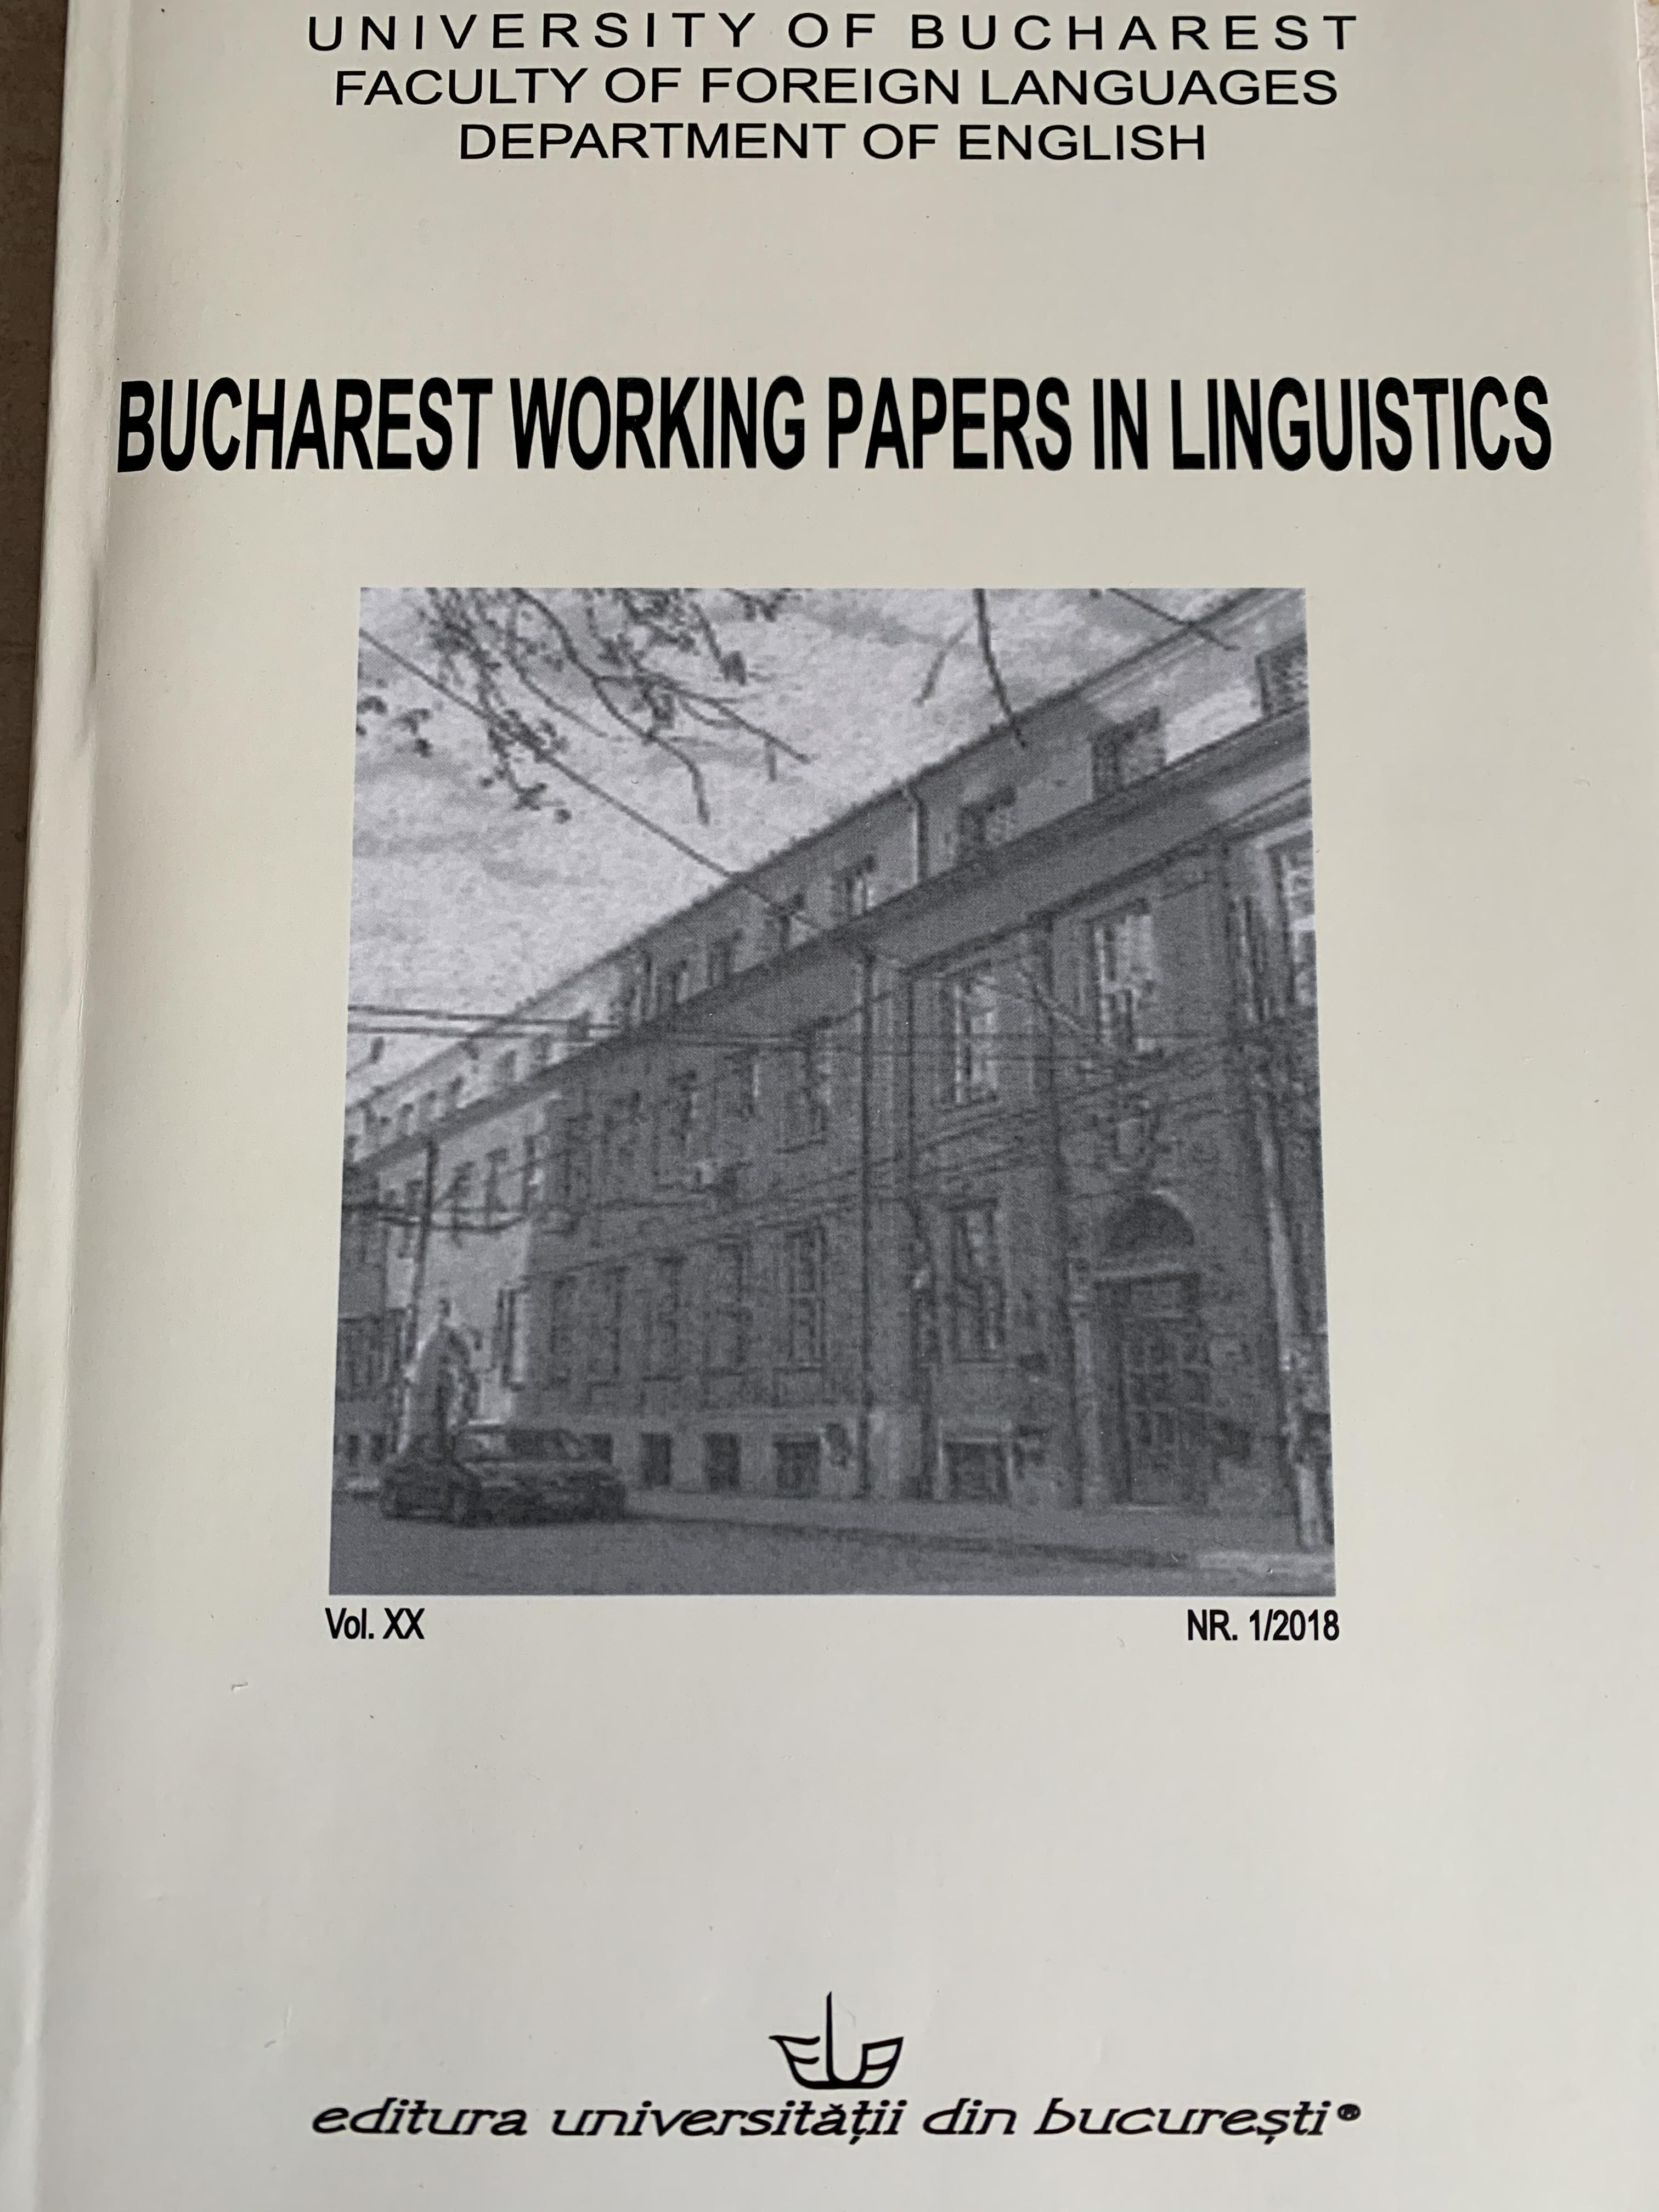 INTRODUCTION TO THE SPECIAL ISSUE:

SOME NOTES ON THE STUDY OF EARLY SUBJECTS IN CHILD ROMANIAN